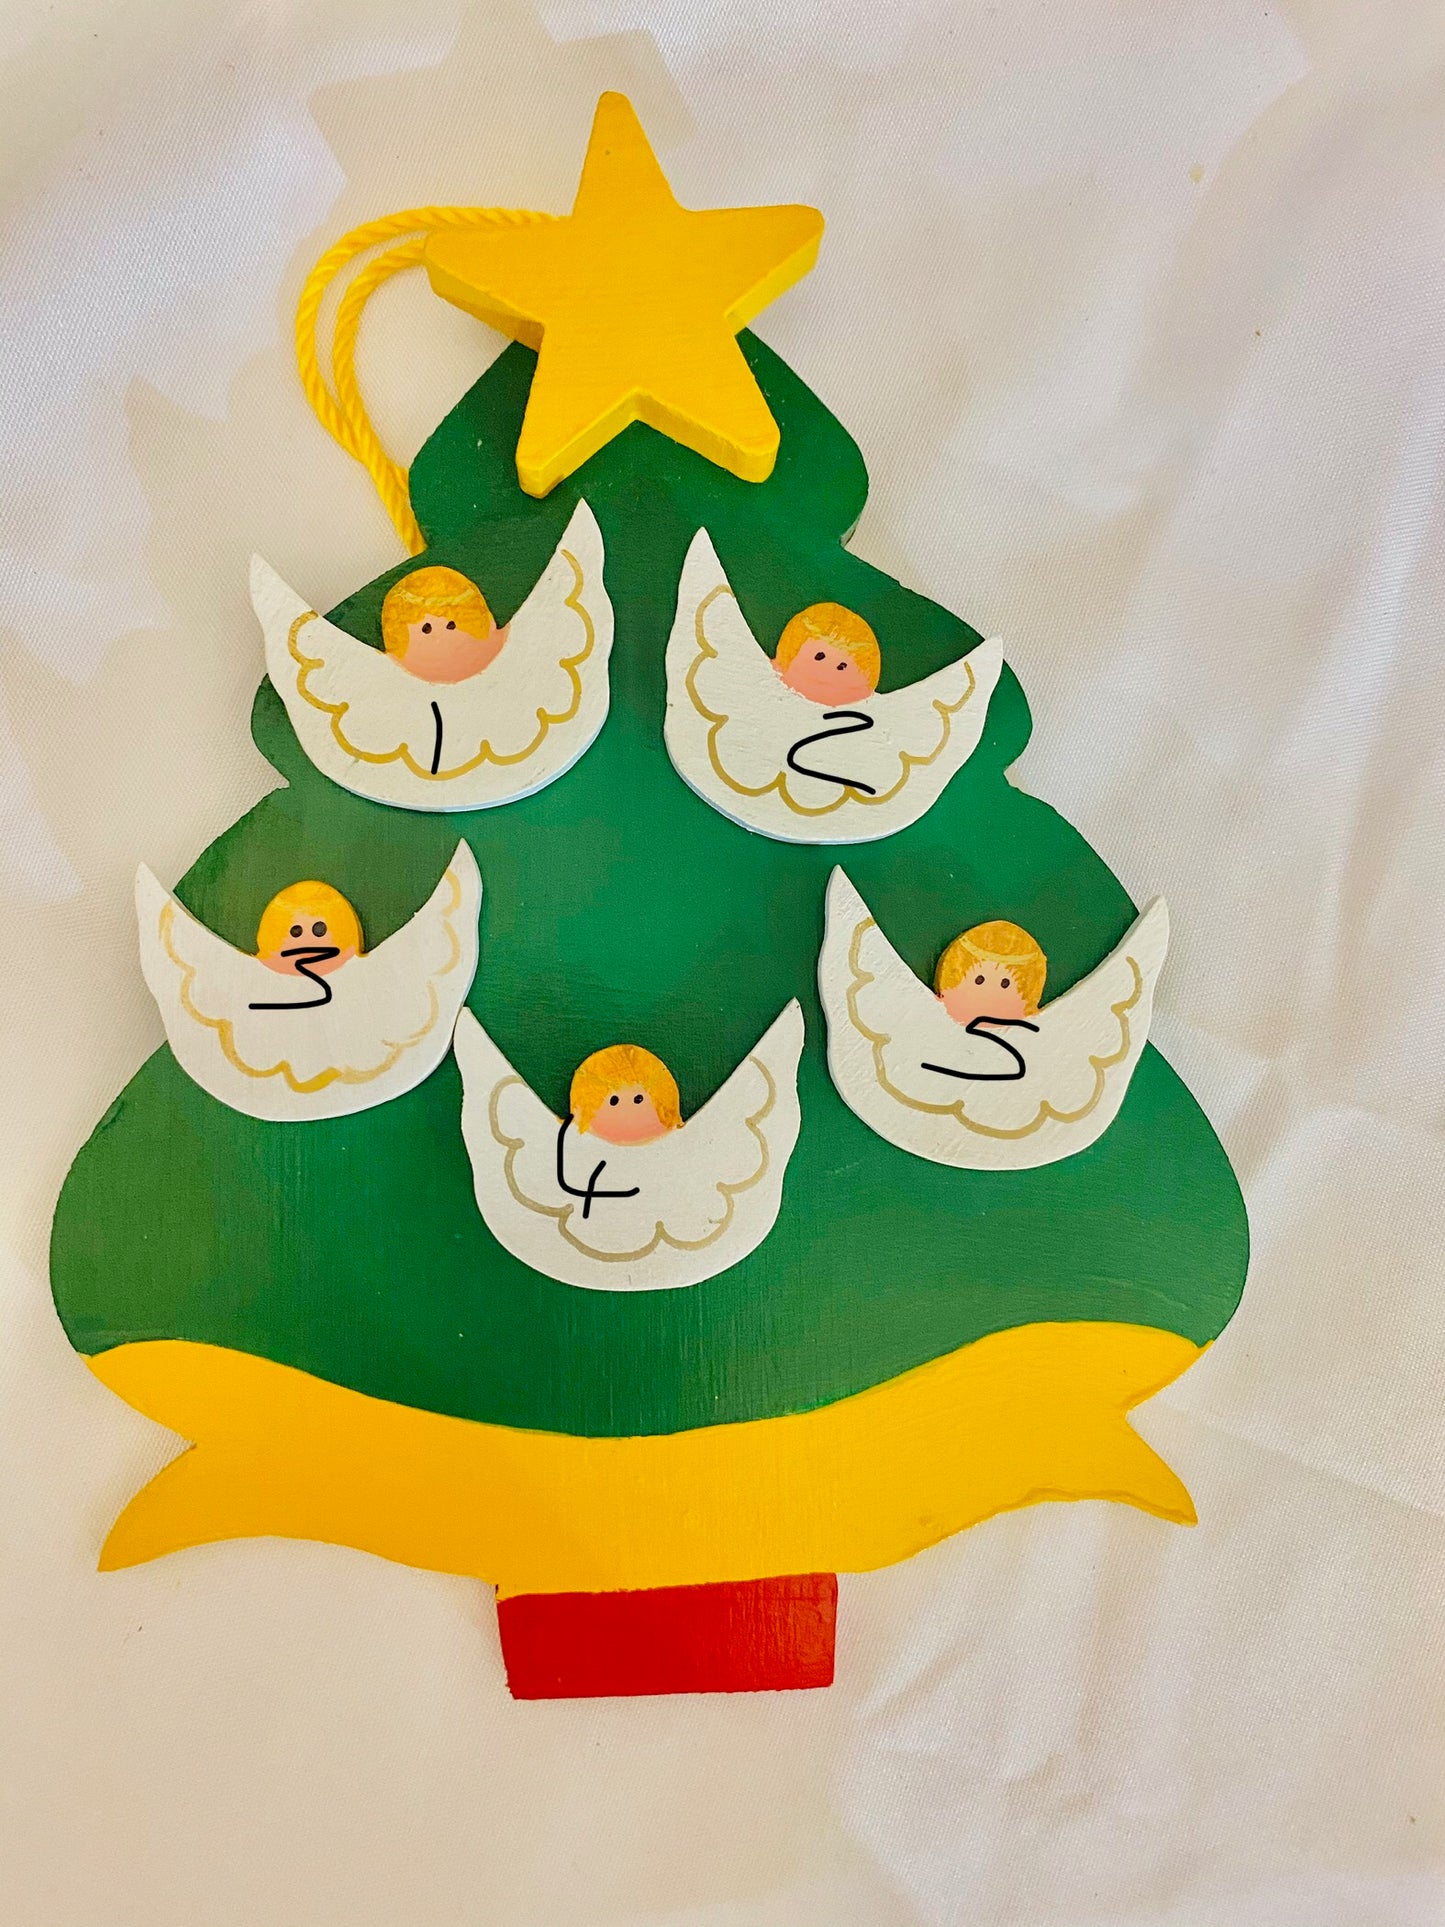 Personalized Ornament with  5 Angels on a Christmas Tree 6" x 4.5"